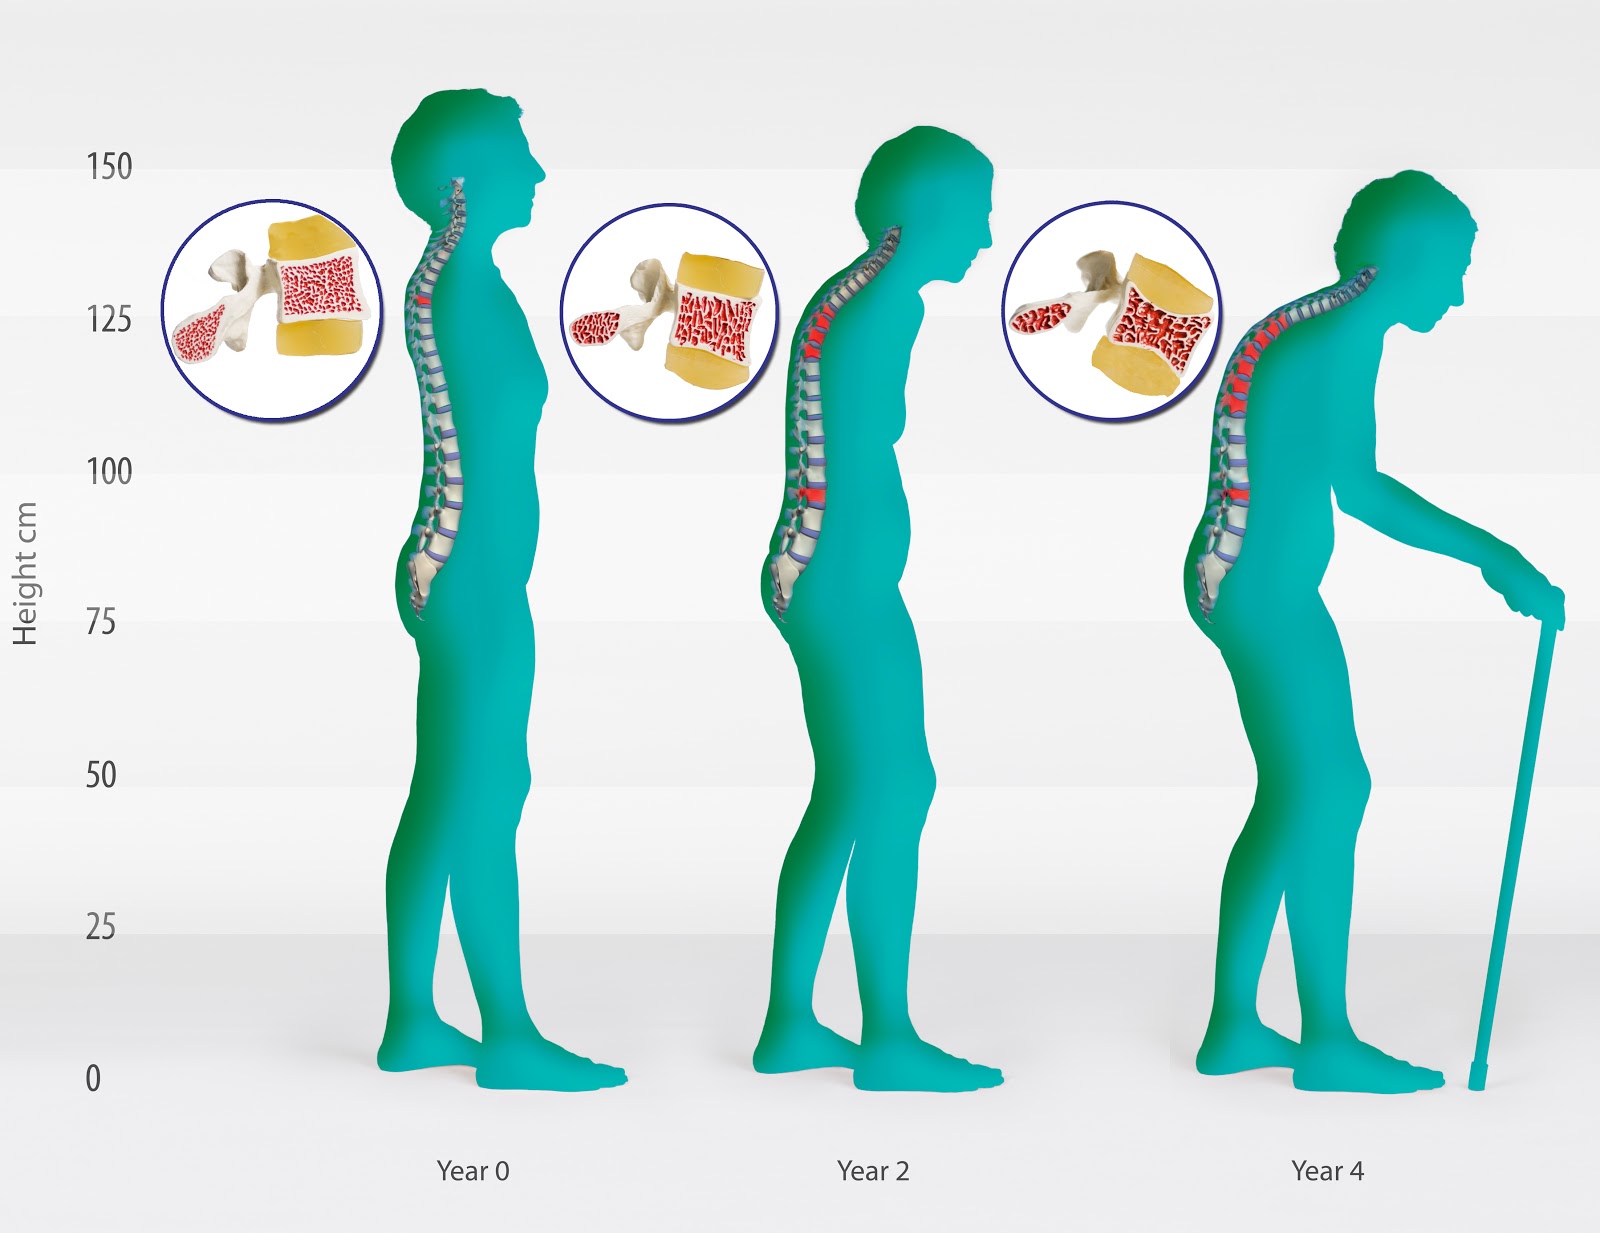 Osteoporosis Stages: Stress and Lifestyle Google image from https://s-media-cache-ak0.pinimg.com/originals/67/c0/02/67c0026b4e378b96798e96404a082b21.jpg